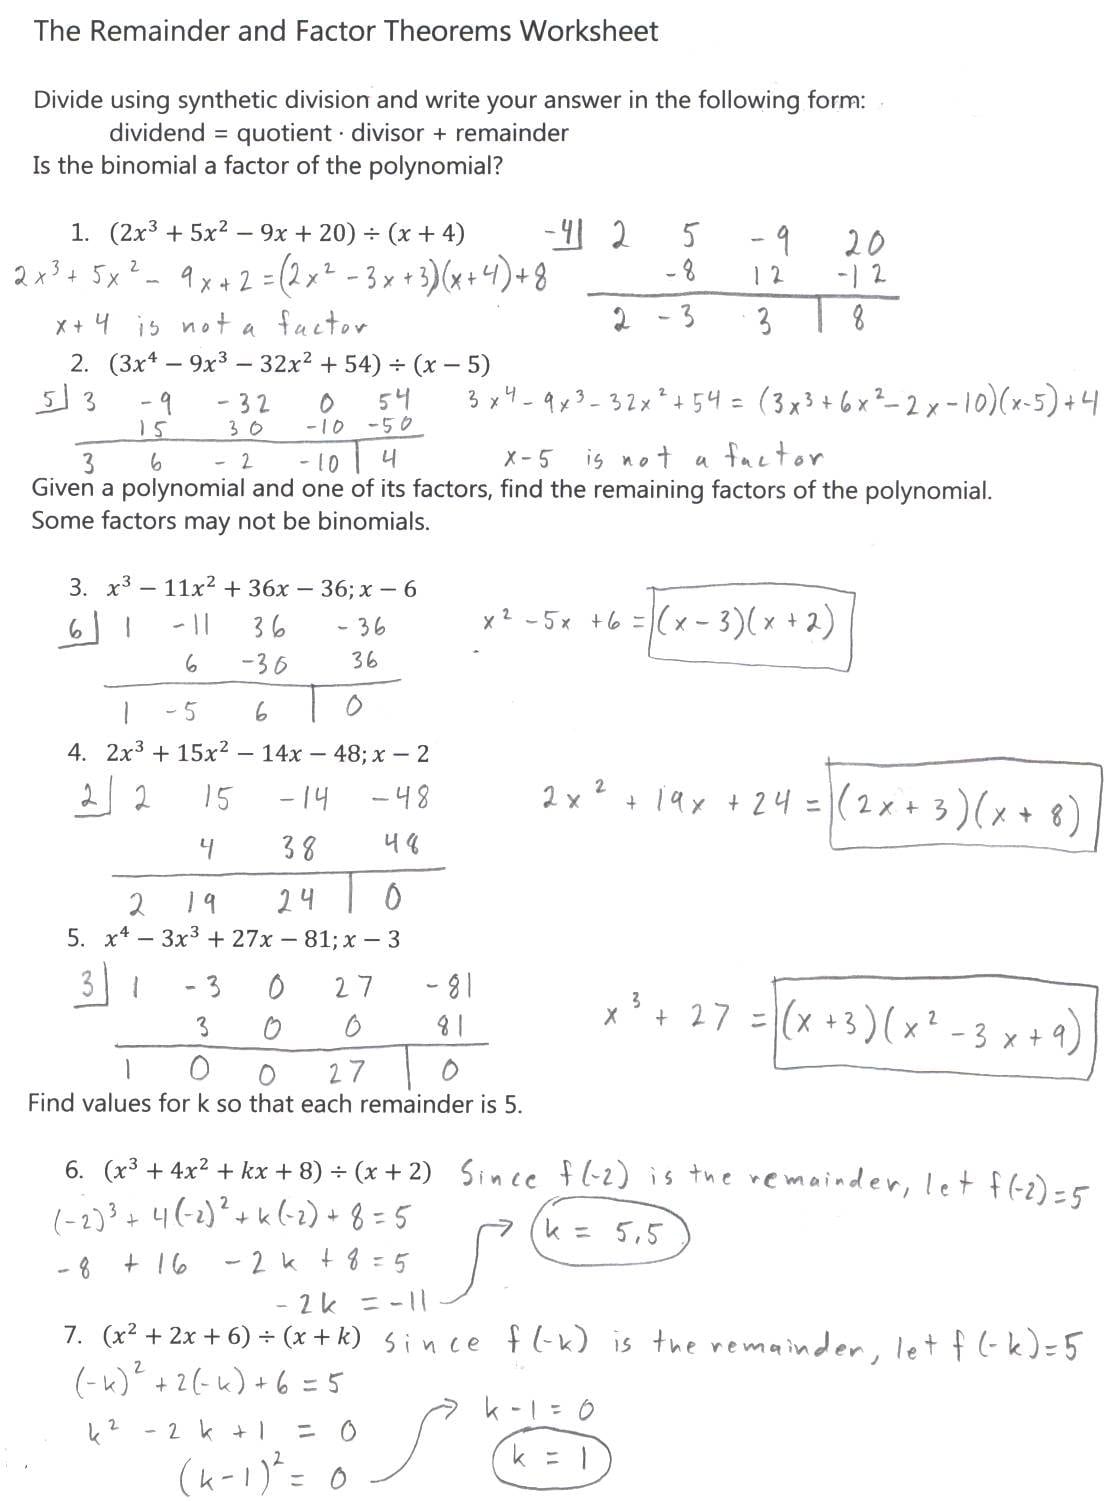 Printables Synthetic Division Worksheet Lemonlilyfestival Together With Dividing Polynomials Long And Synthetic Division Worksheet Answers